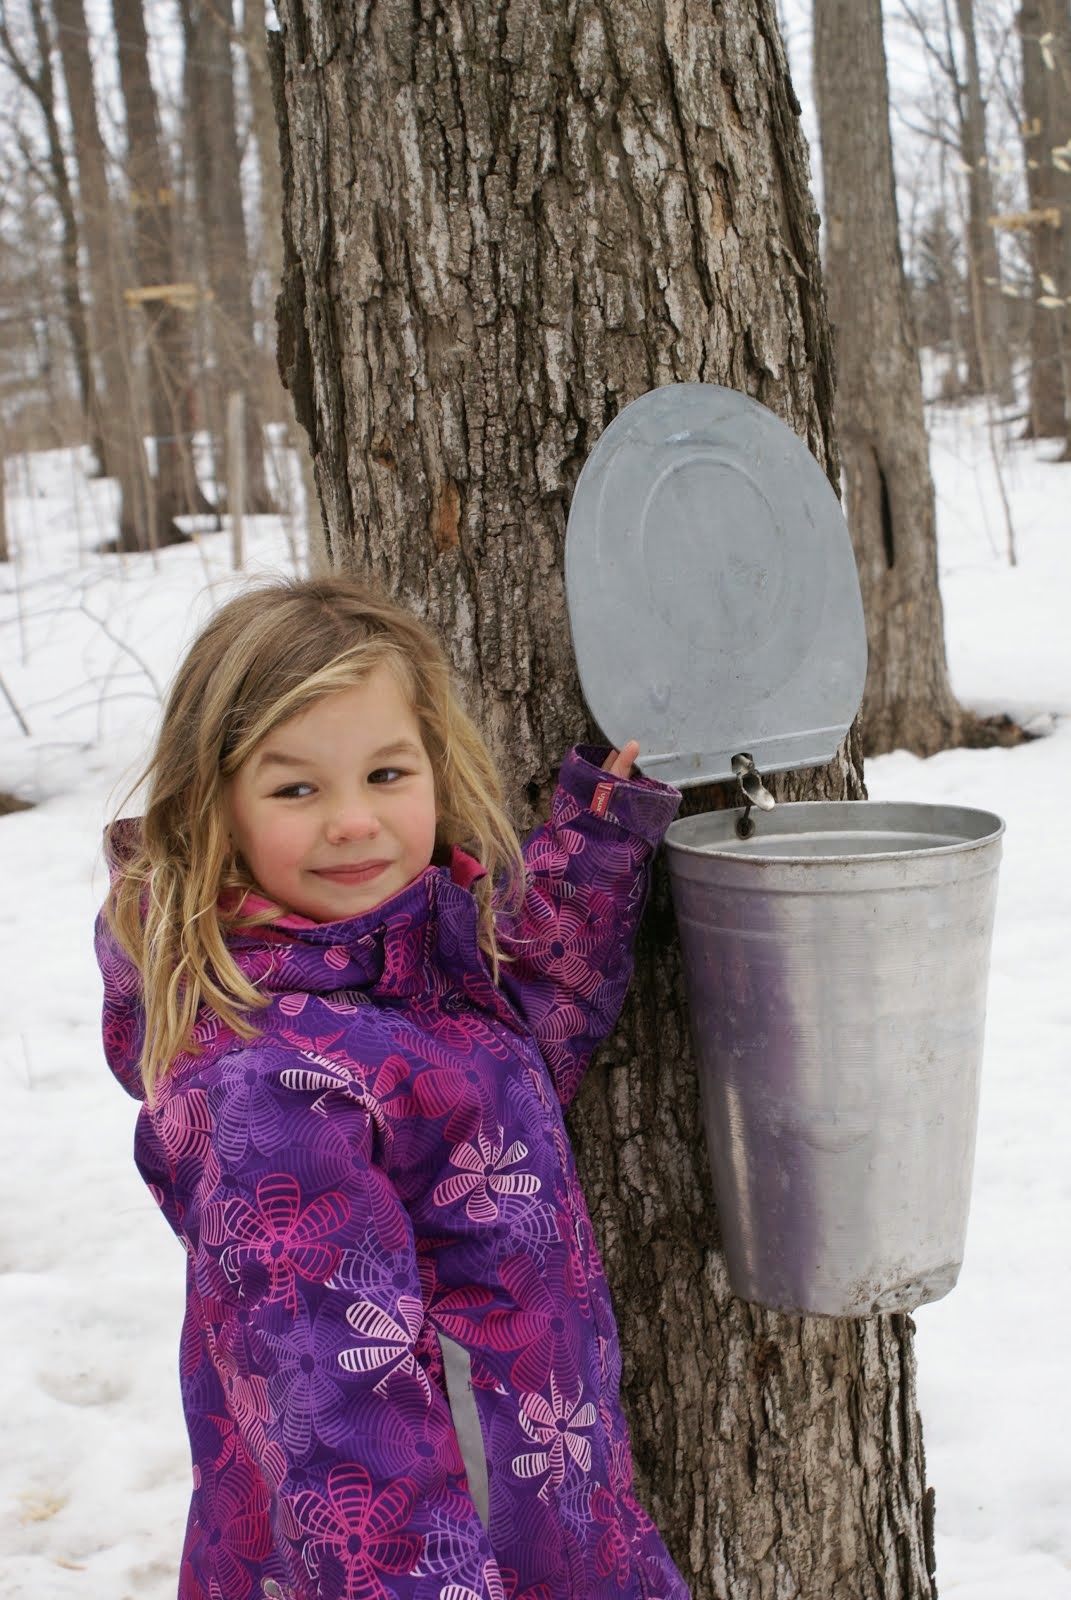 Maple Syrup time